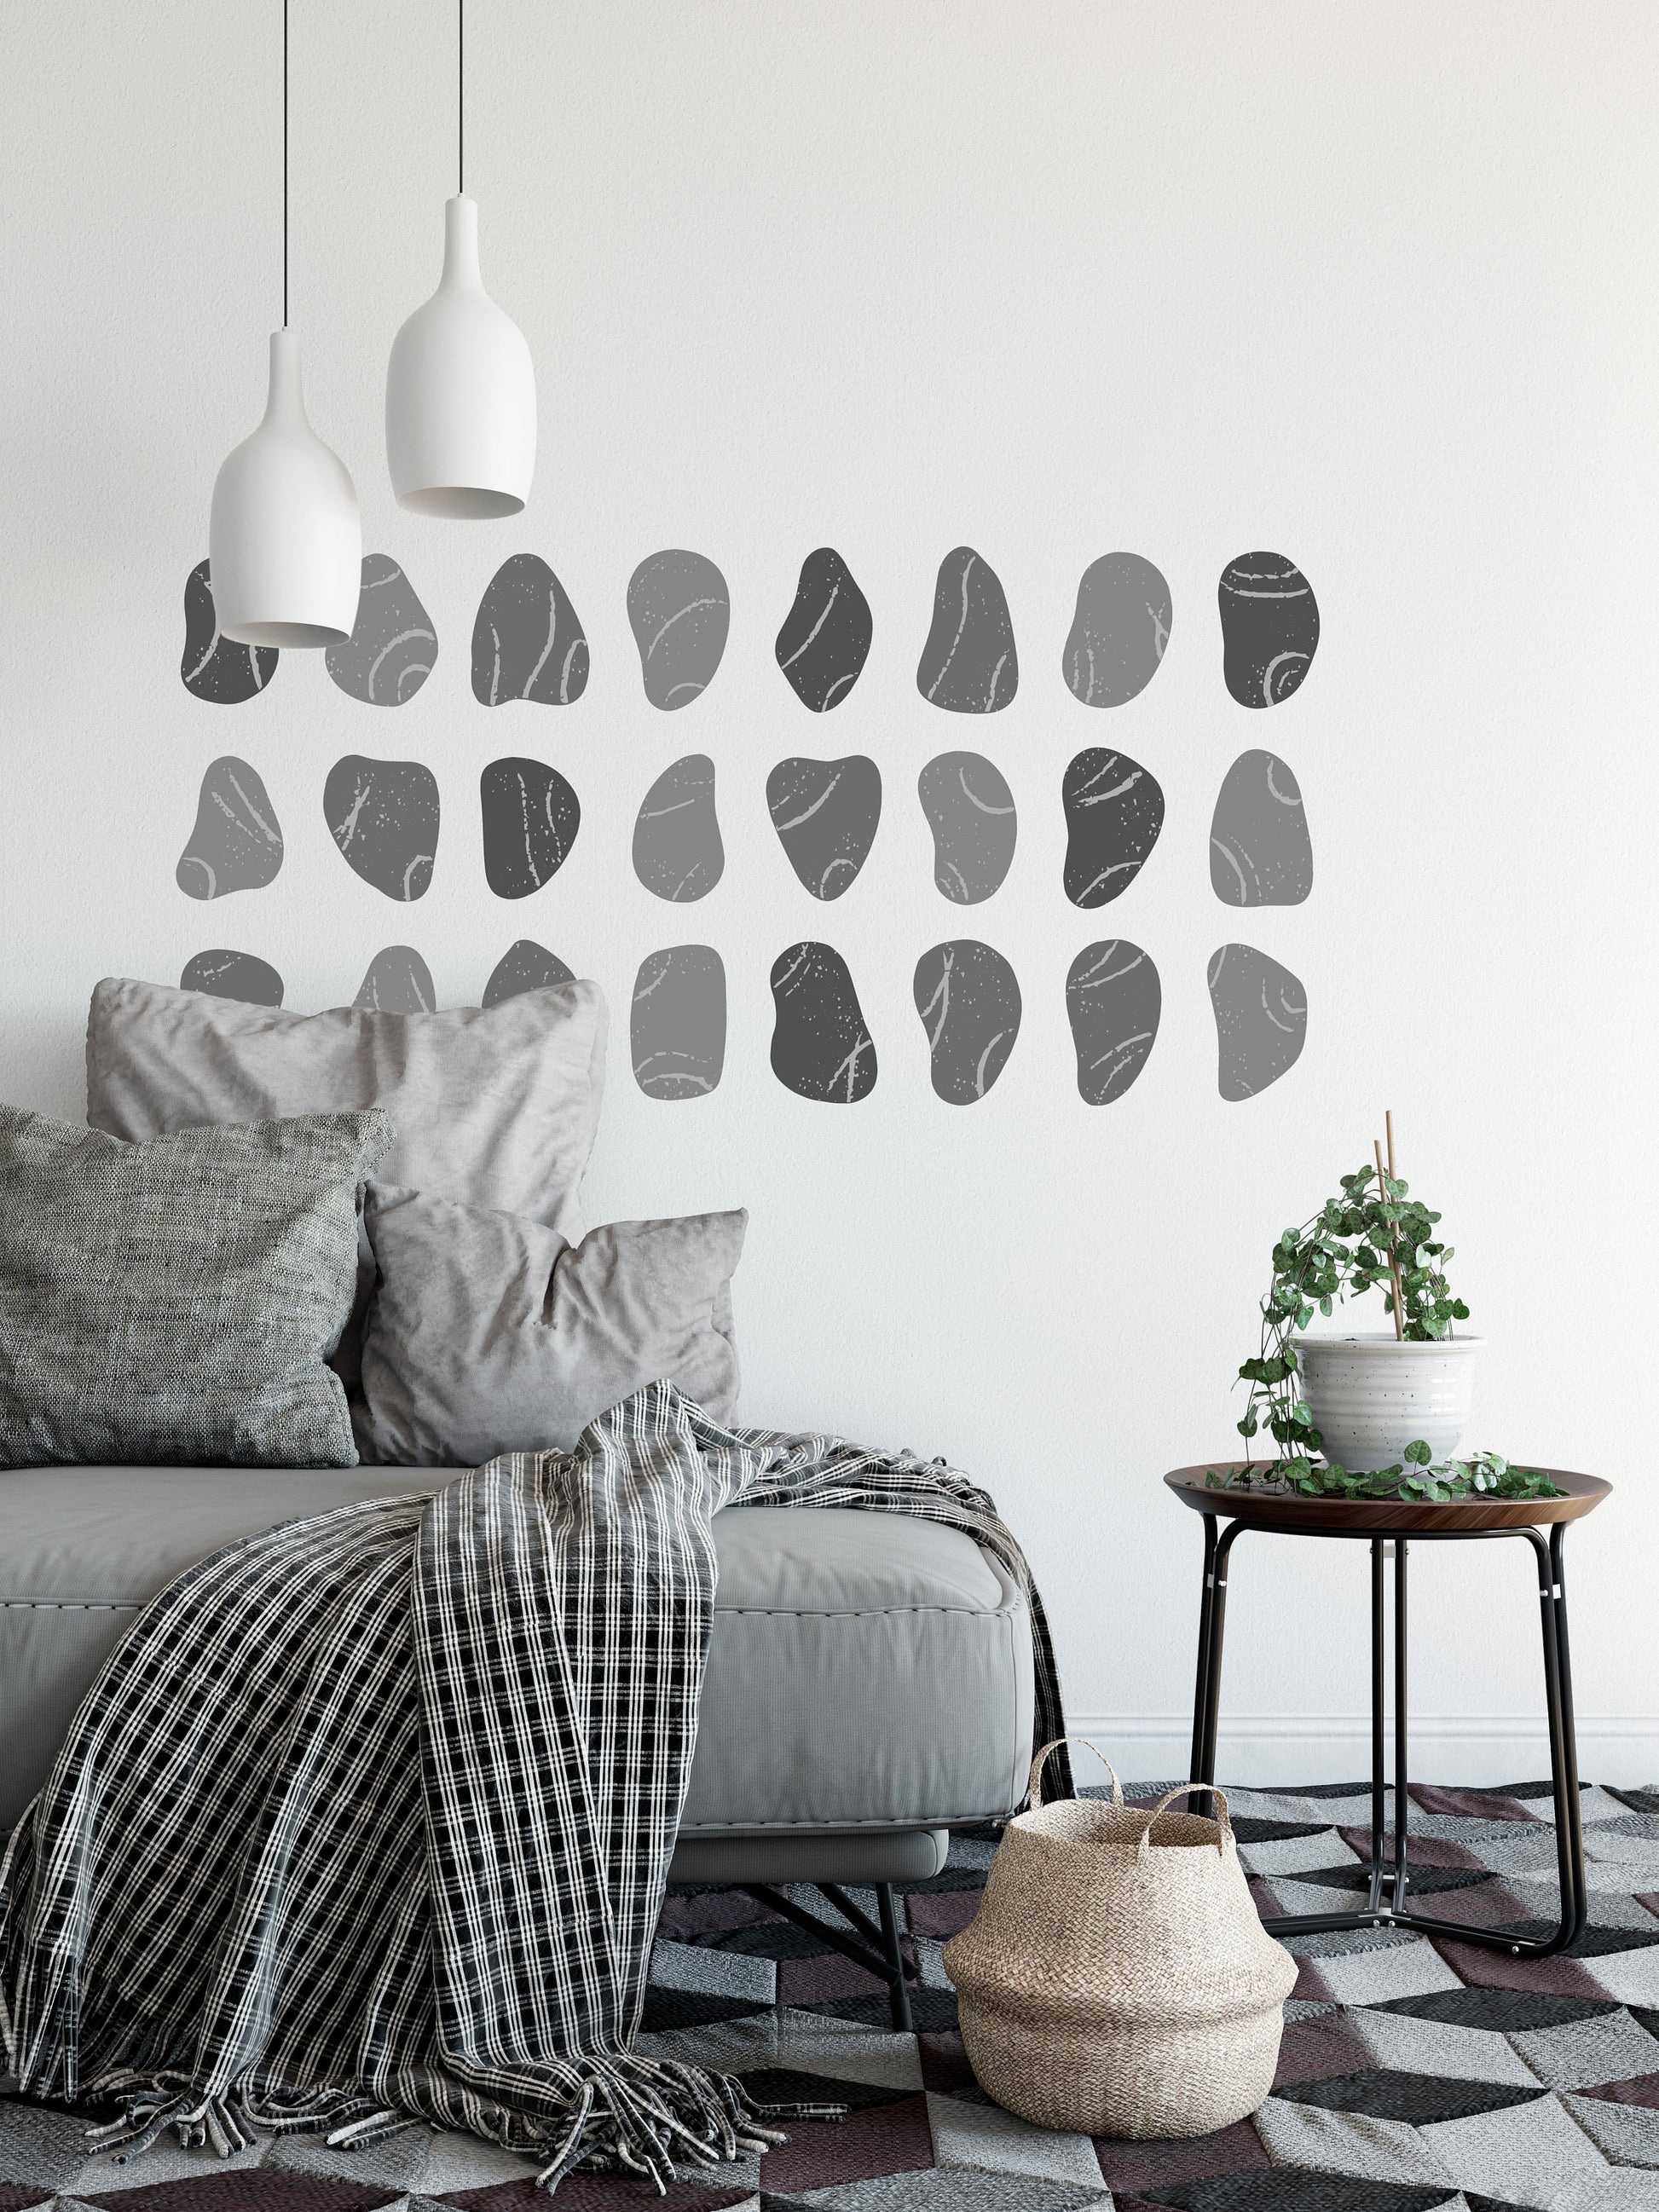 24 Large Pebble Wall Stickers